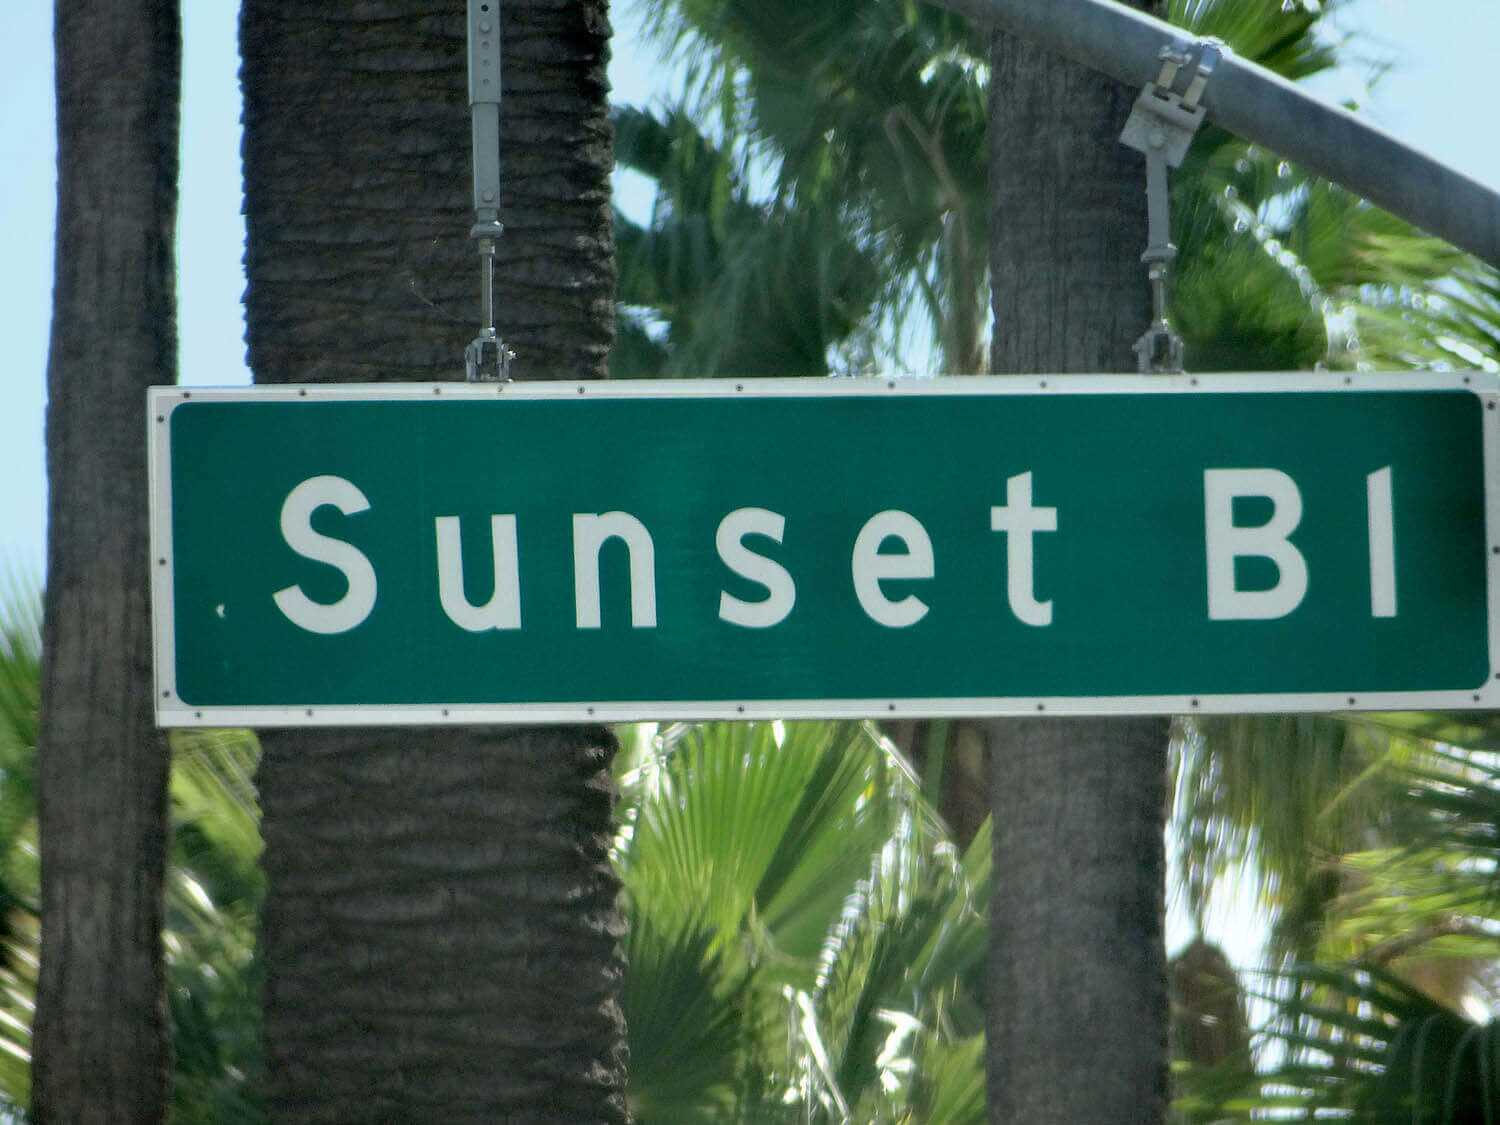 Hollywood cemetery tours: Sunset Boulevard